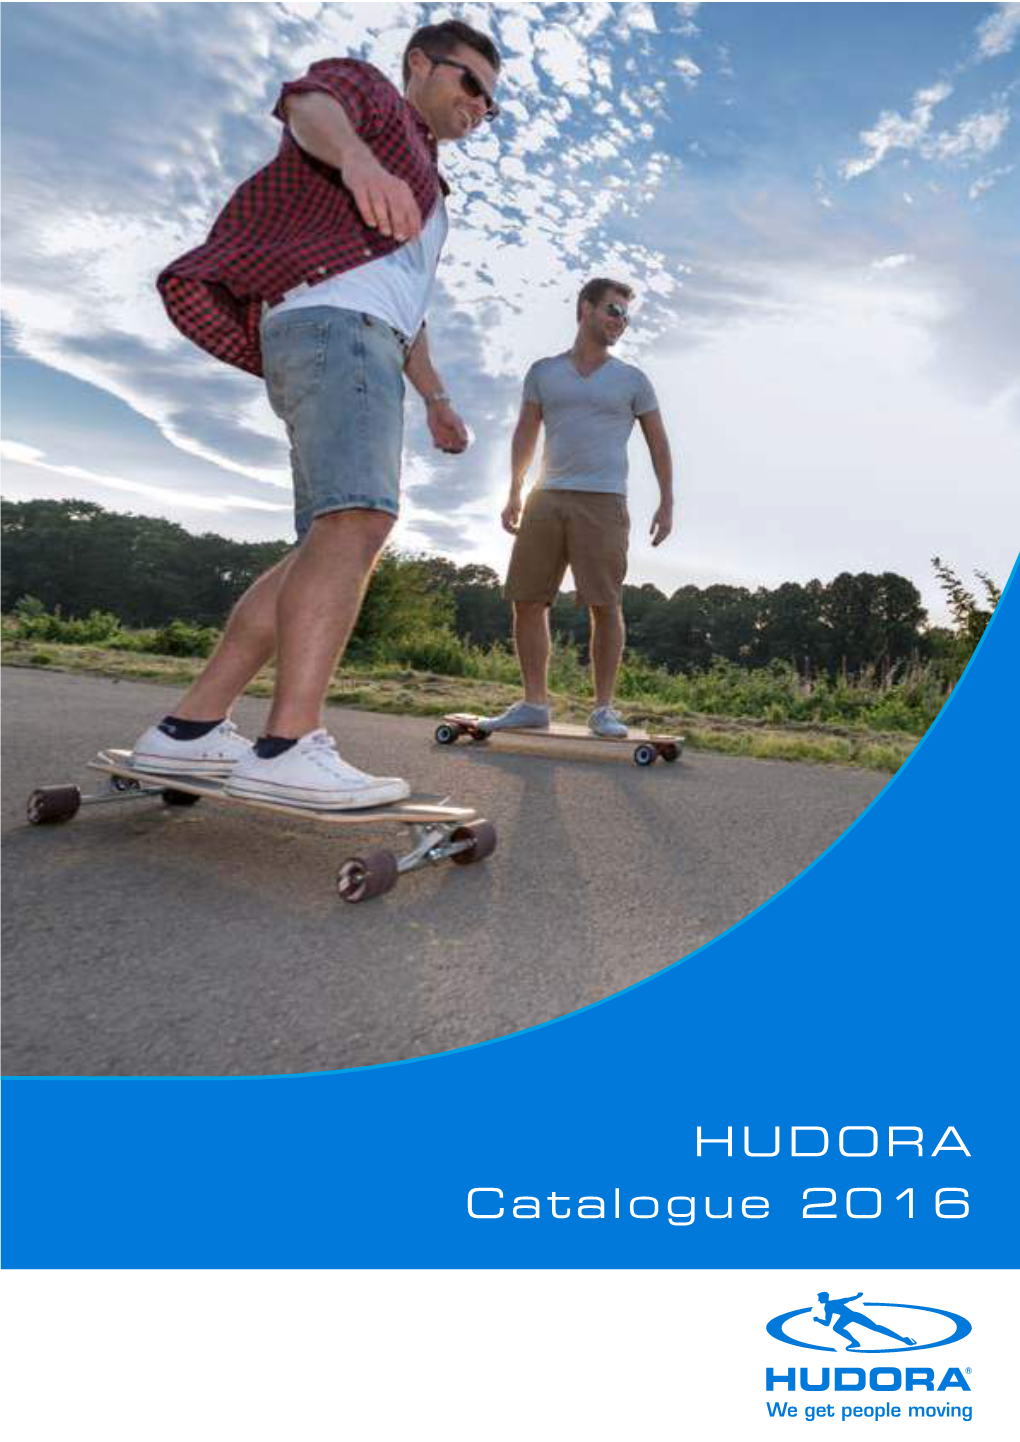 HUDORA Catalogue 2016 to Find Our Products